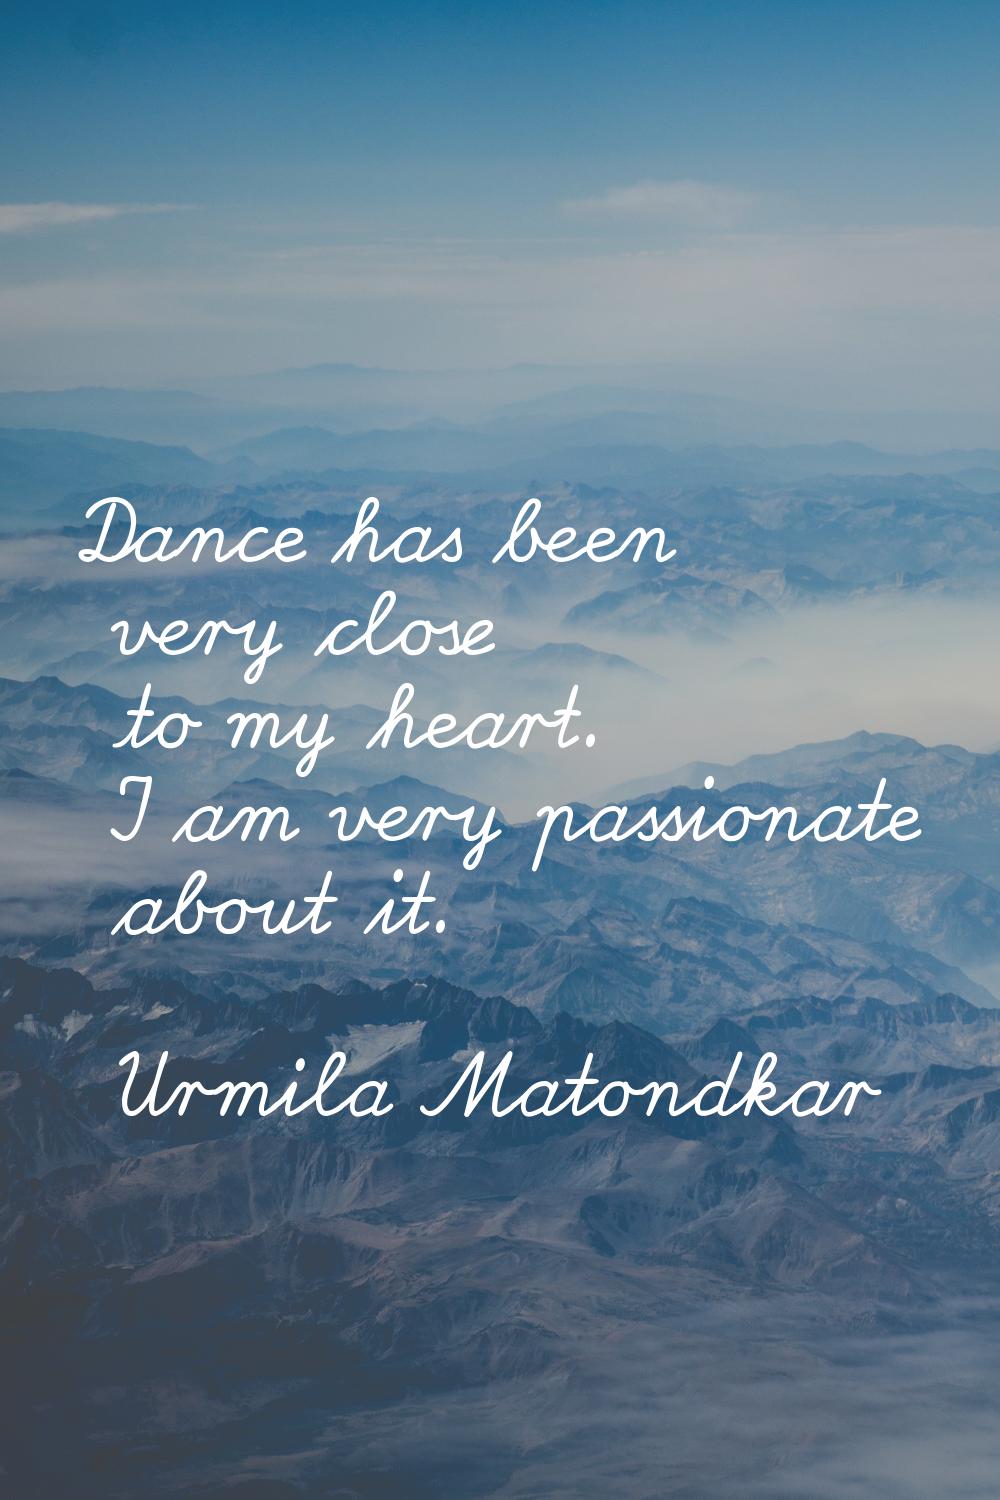 Dance has been very close to my heart. I am very passionate about it.